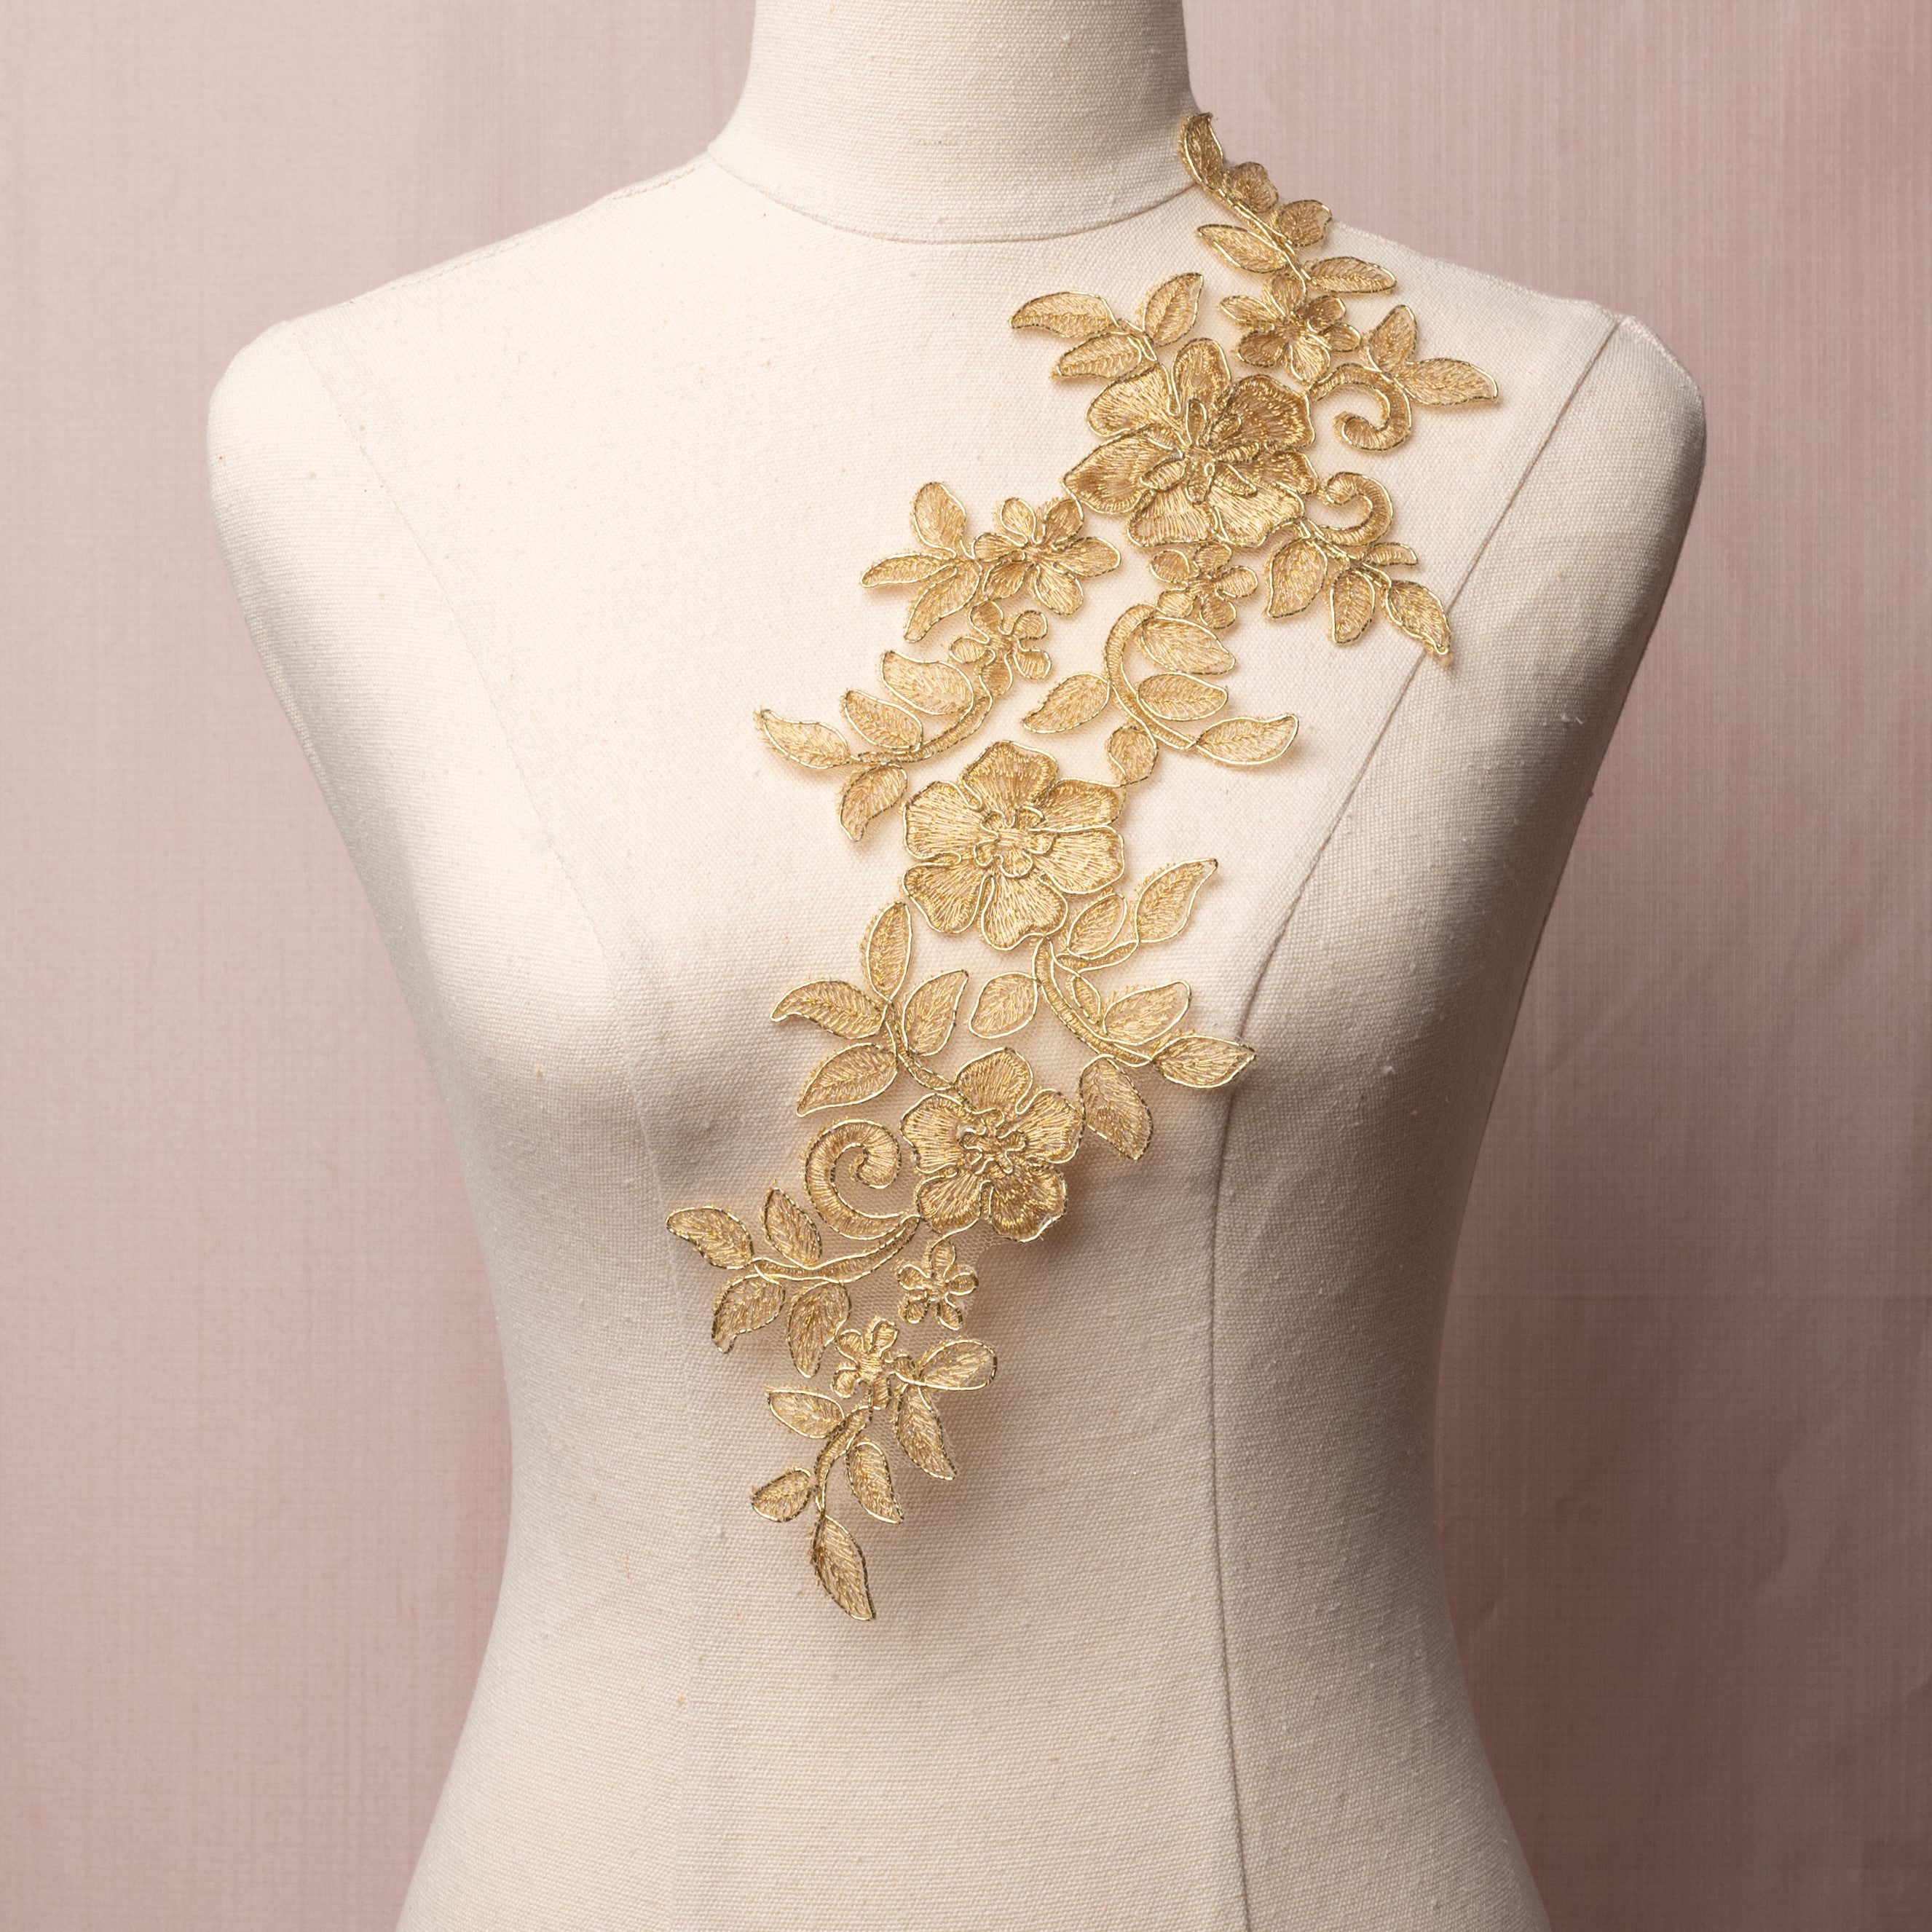 Single trailing floral applique embroidered with metallic gold thread onto a net backing and edged with metallic gold cord.  The applique is displayed on a mannequin.